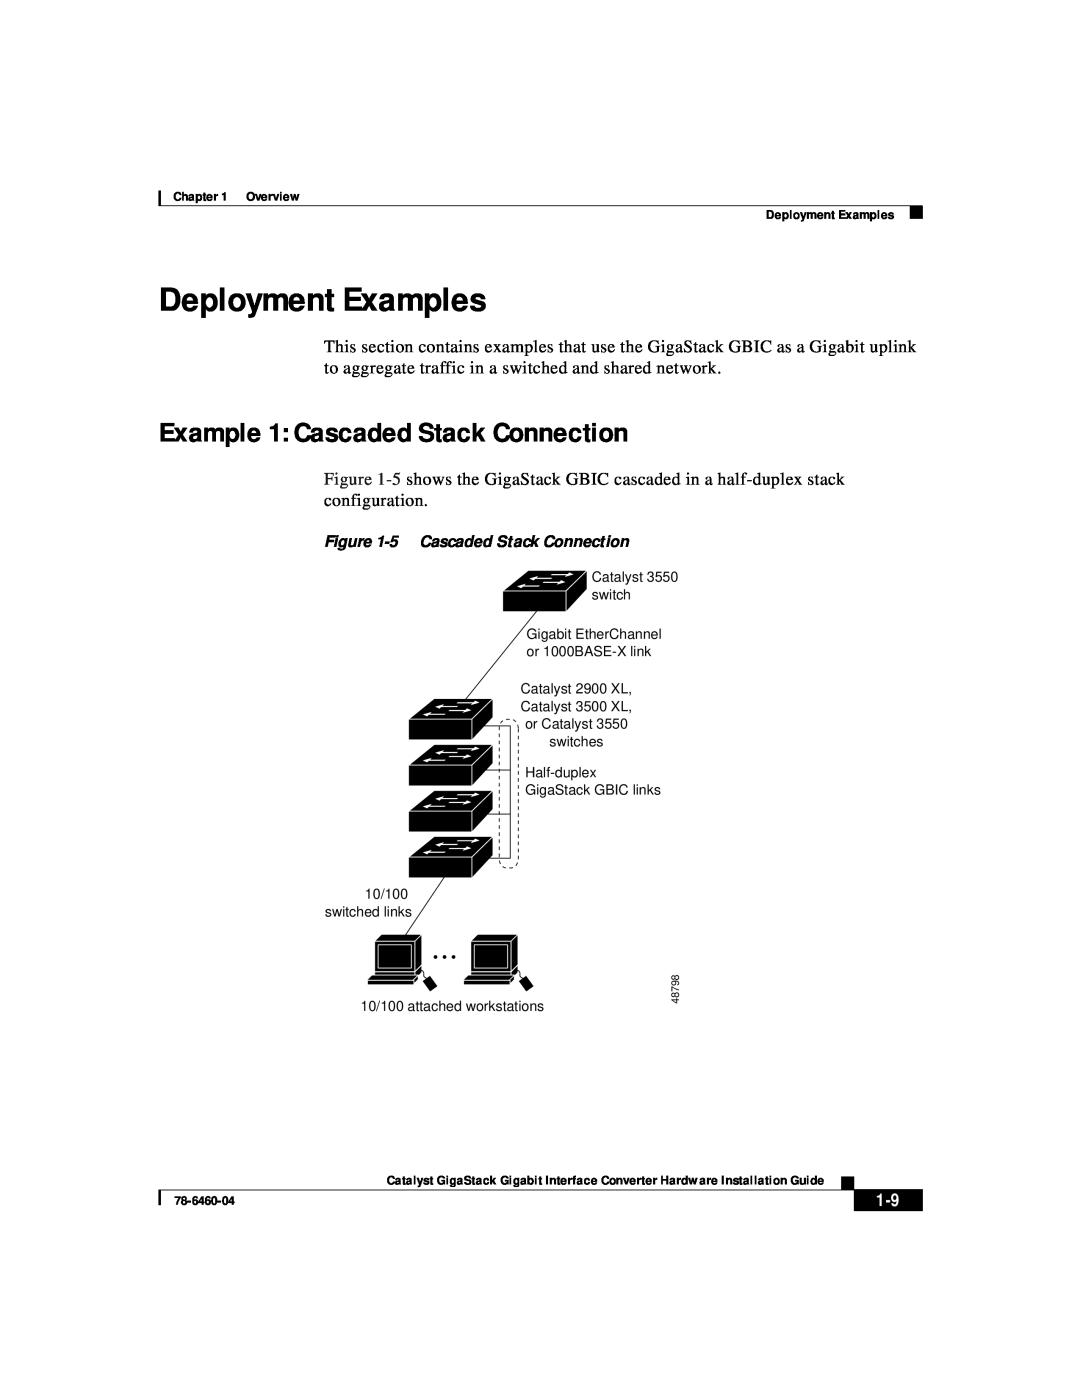 Cisco Systems WS-X3500-XL manual Deployment Examples, Example 1 Cascaded Stack Connection 